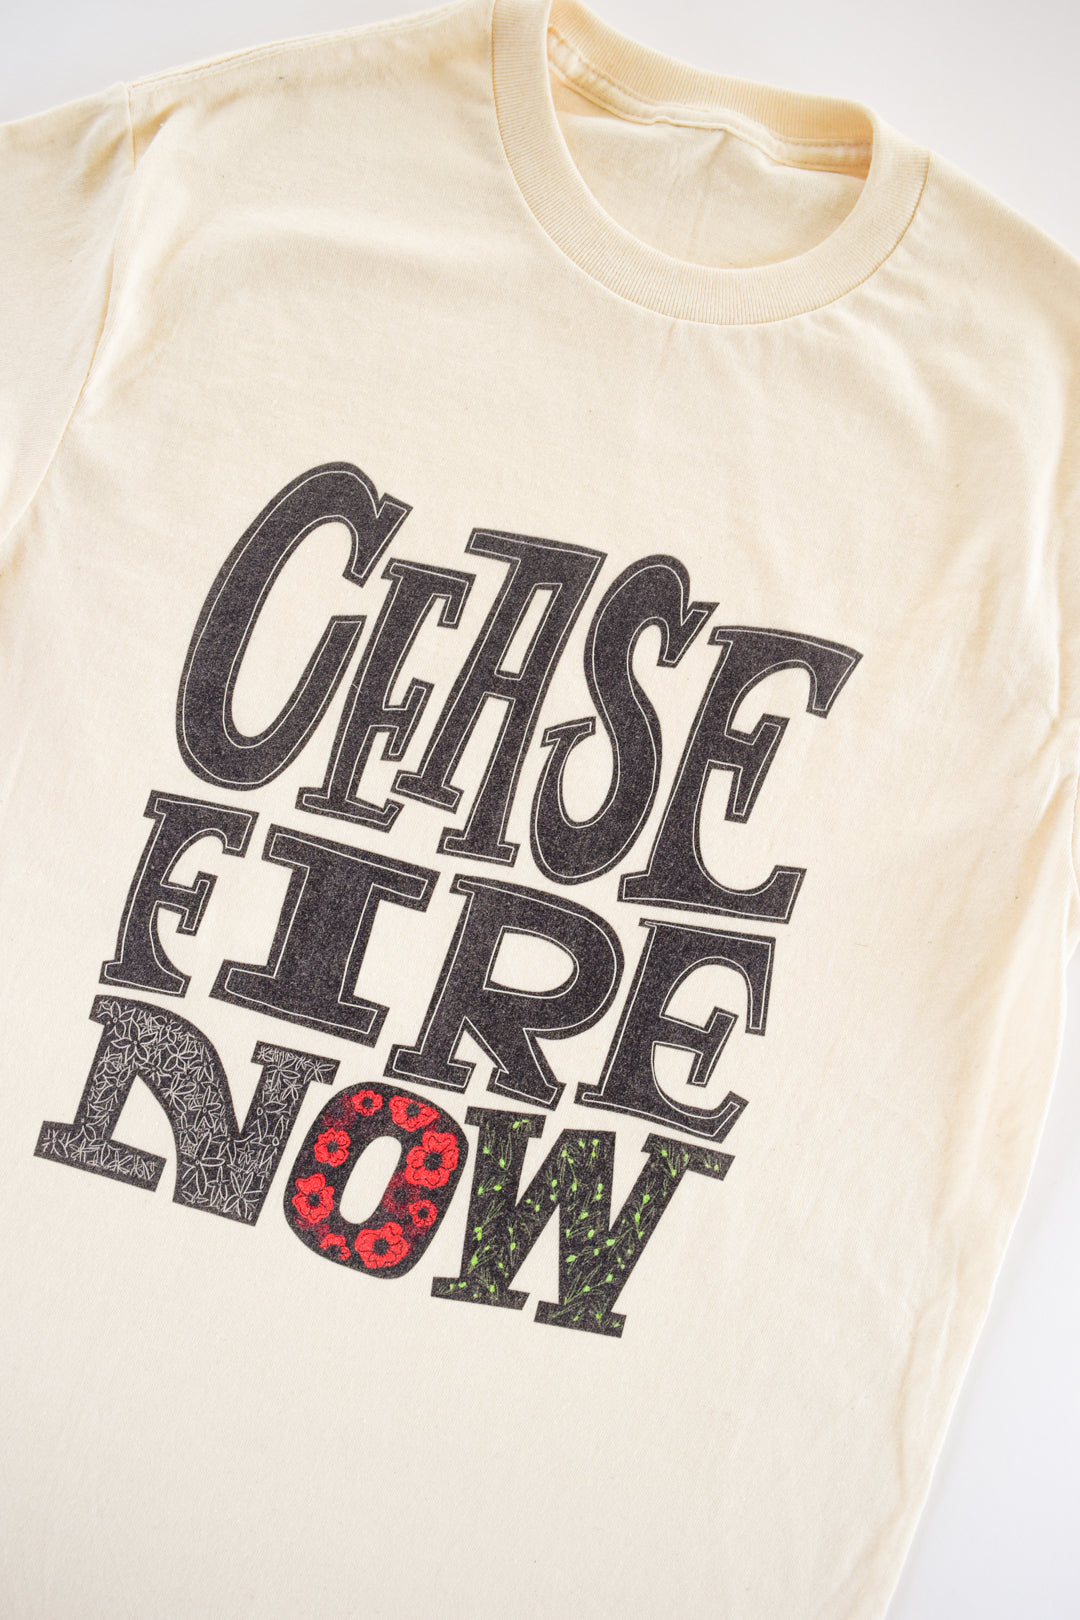 CEASEFIRE NOW! T-Shirt